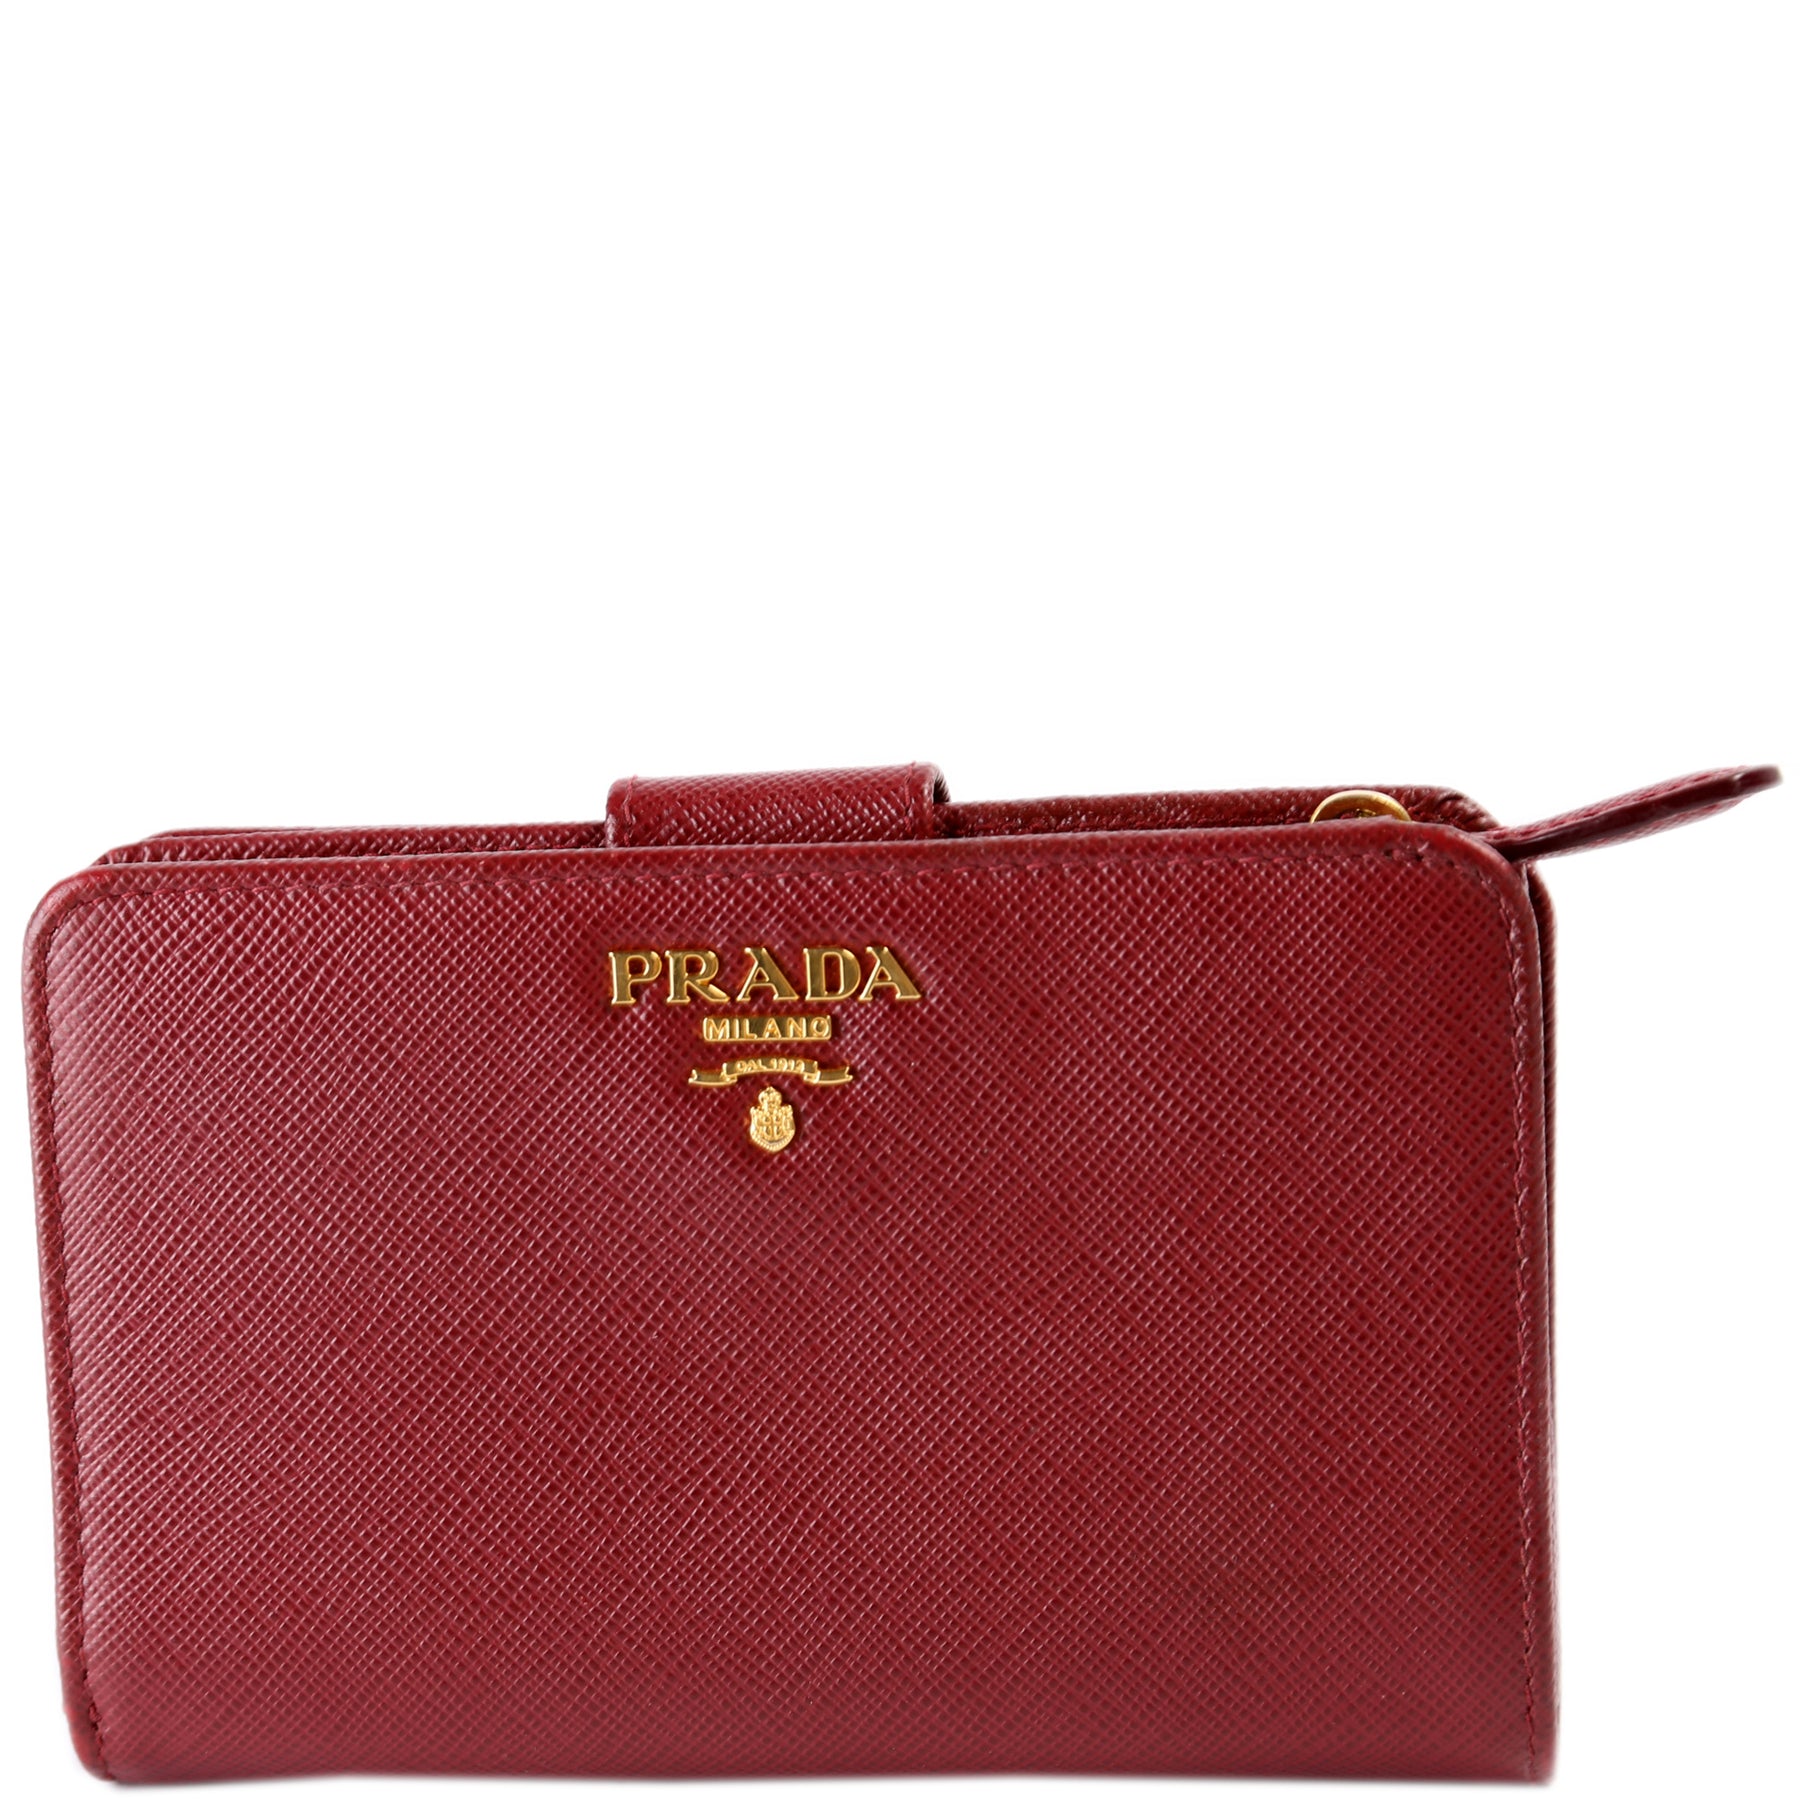 Prada - Women's Small Saffiano Wallet - Red - Leather